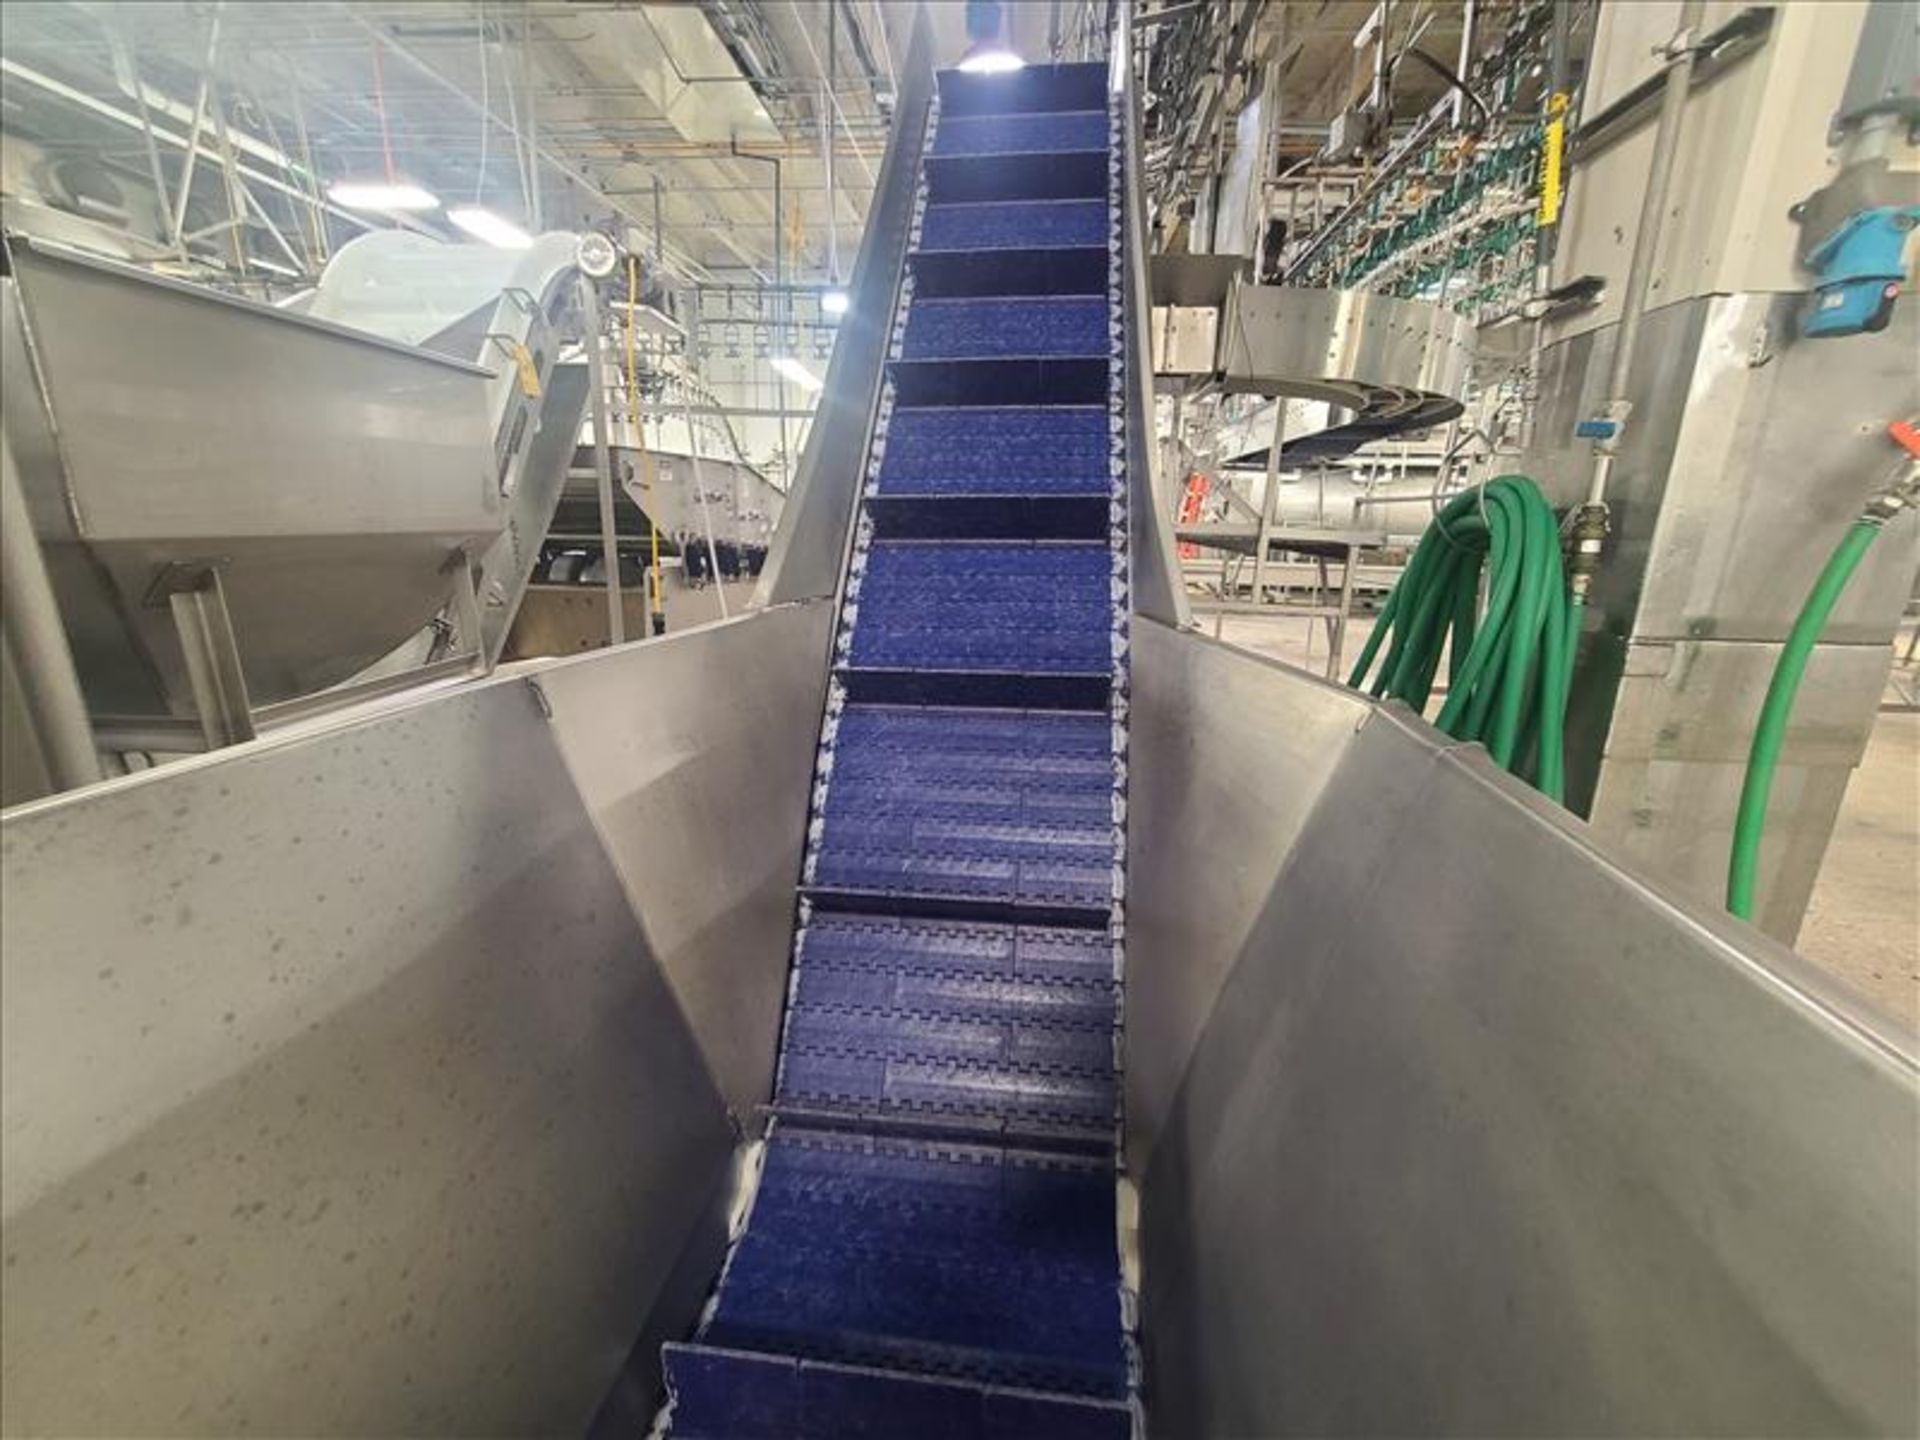 inclined fluted belt conveyor, stainless steel, pwr, wash-down motor 0.5 hp, 18 in. x 16 ft. x 7 ft. - Image 2 of 4